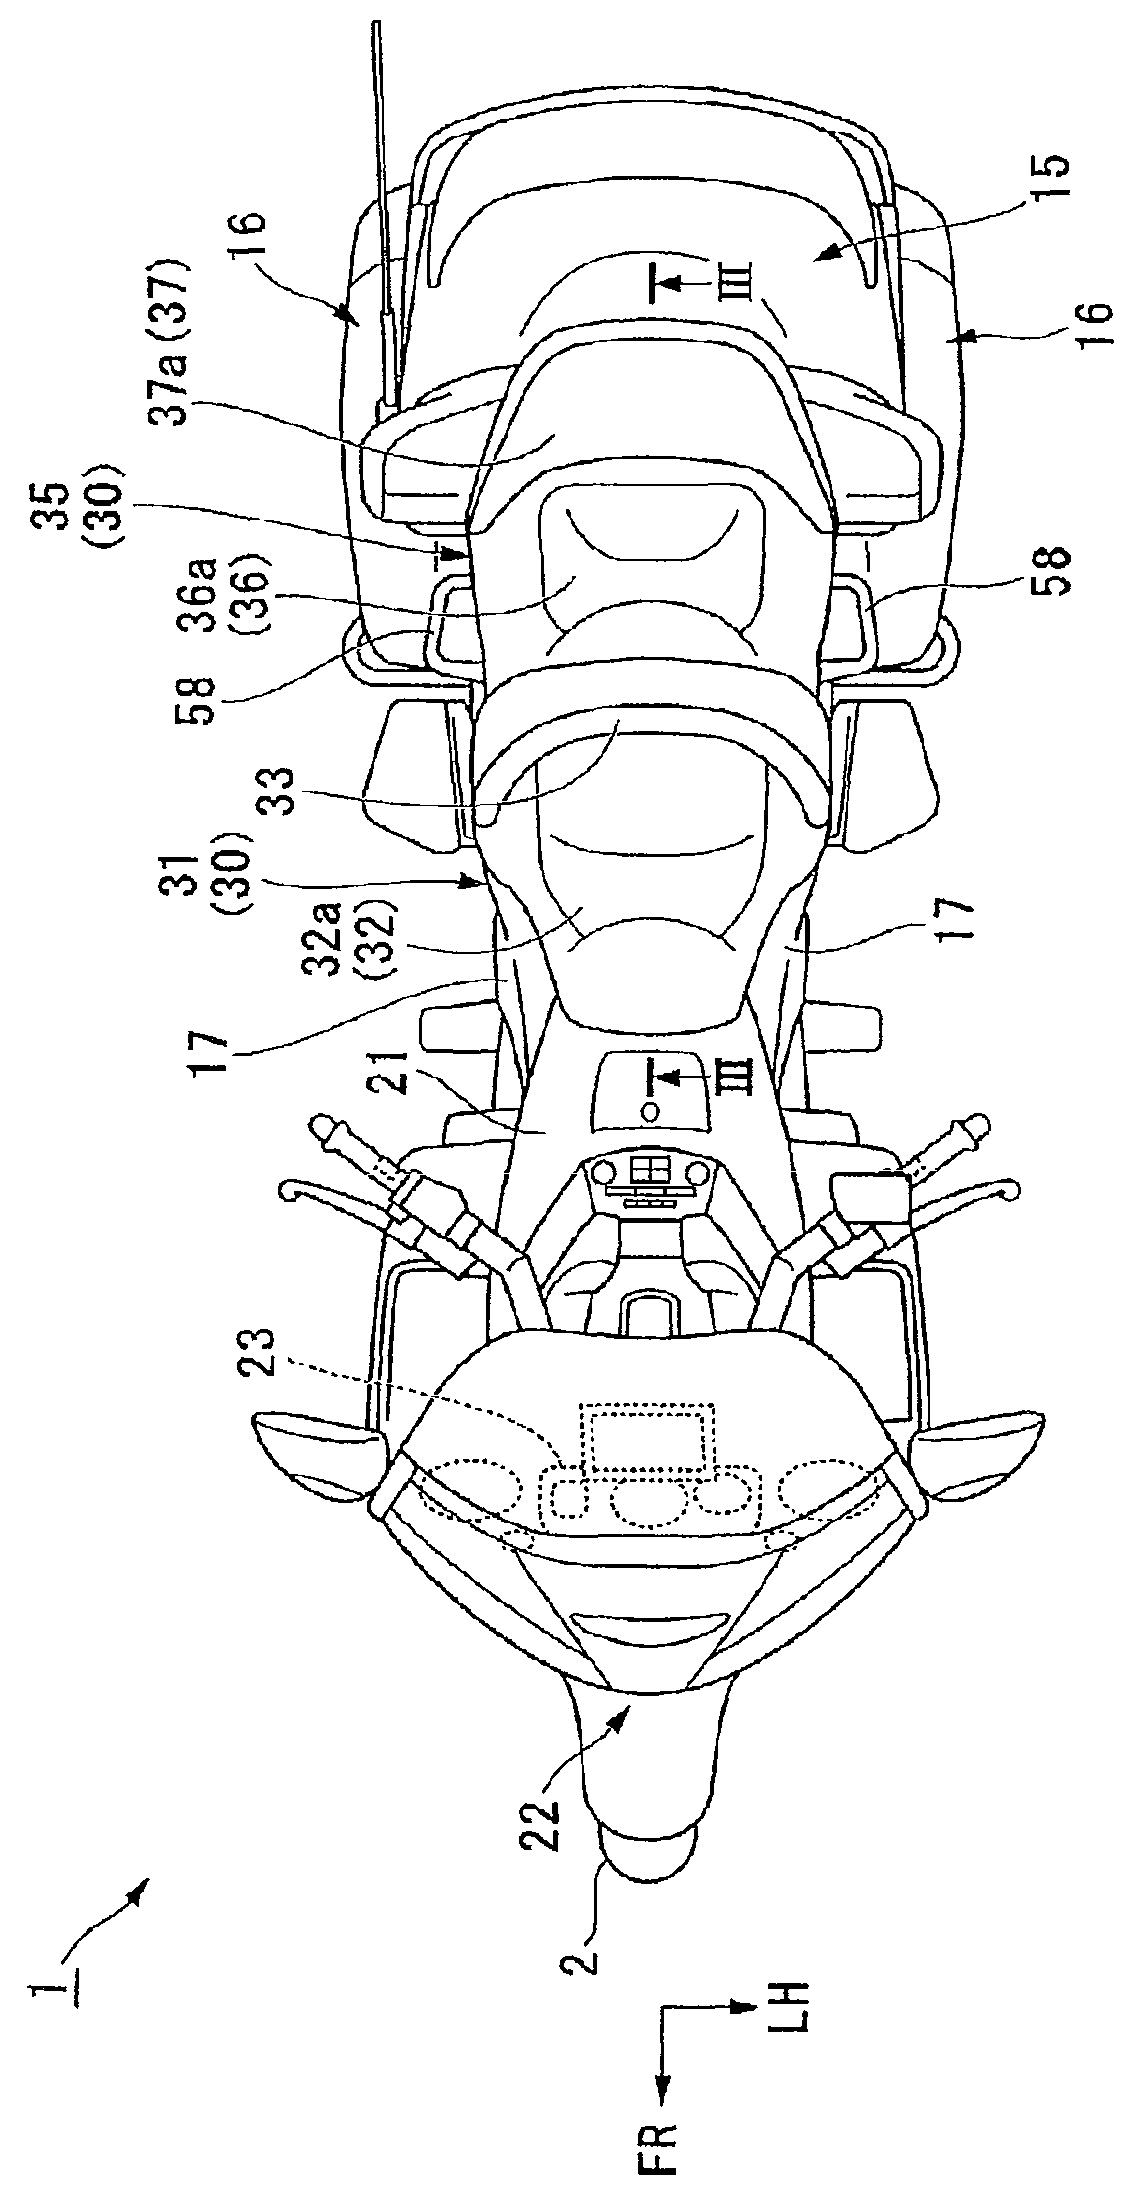 Vehicle seat structure